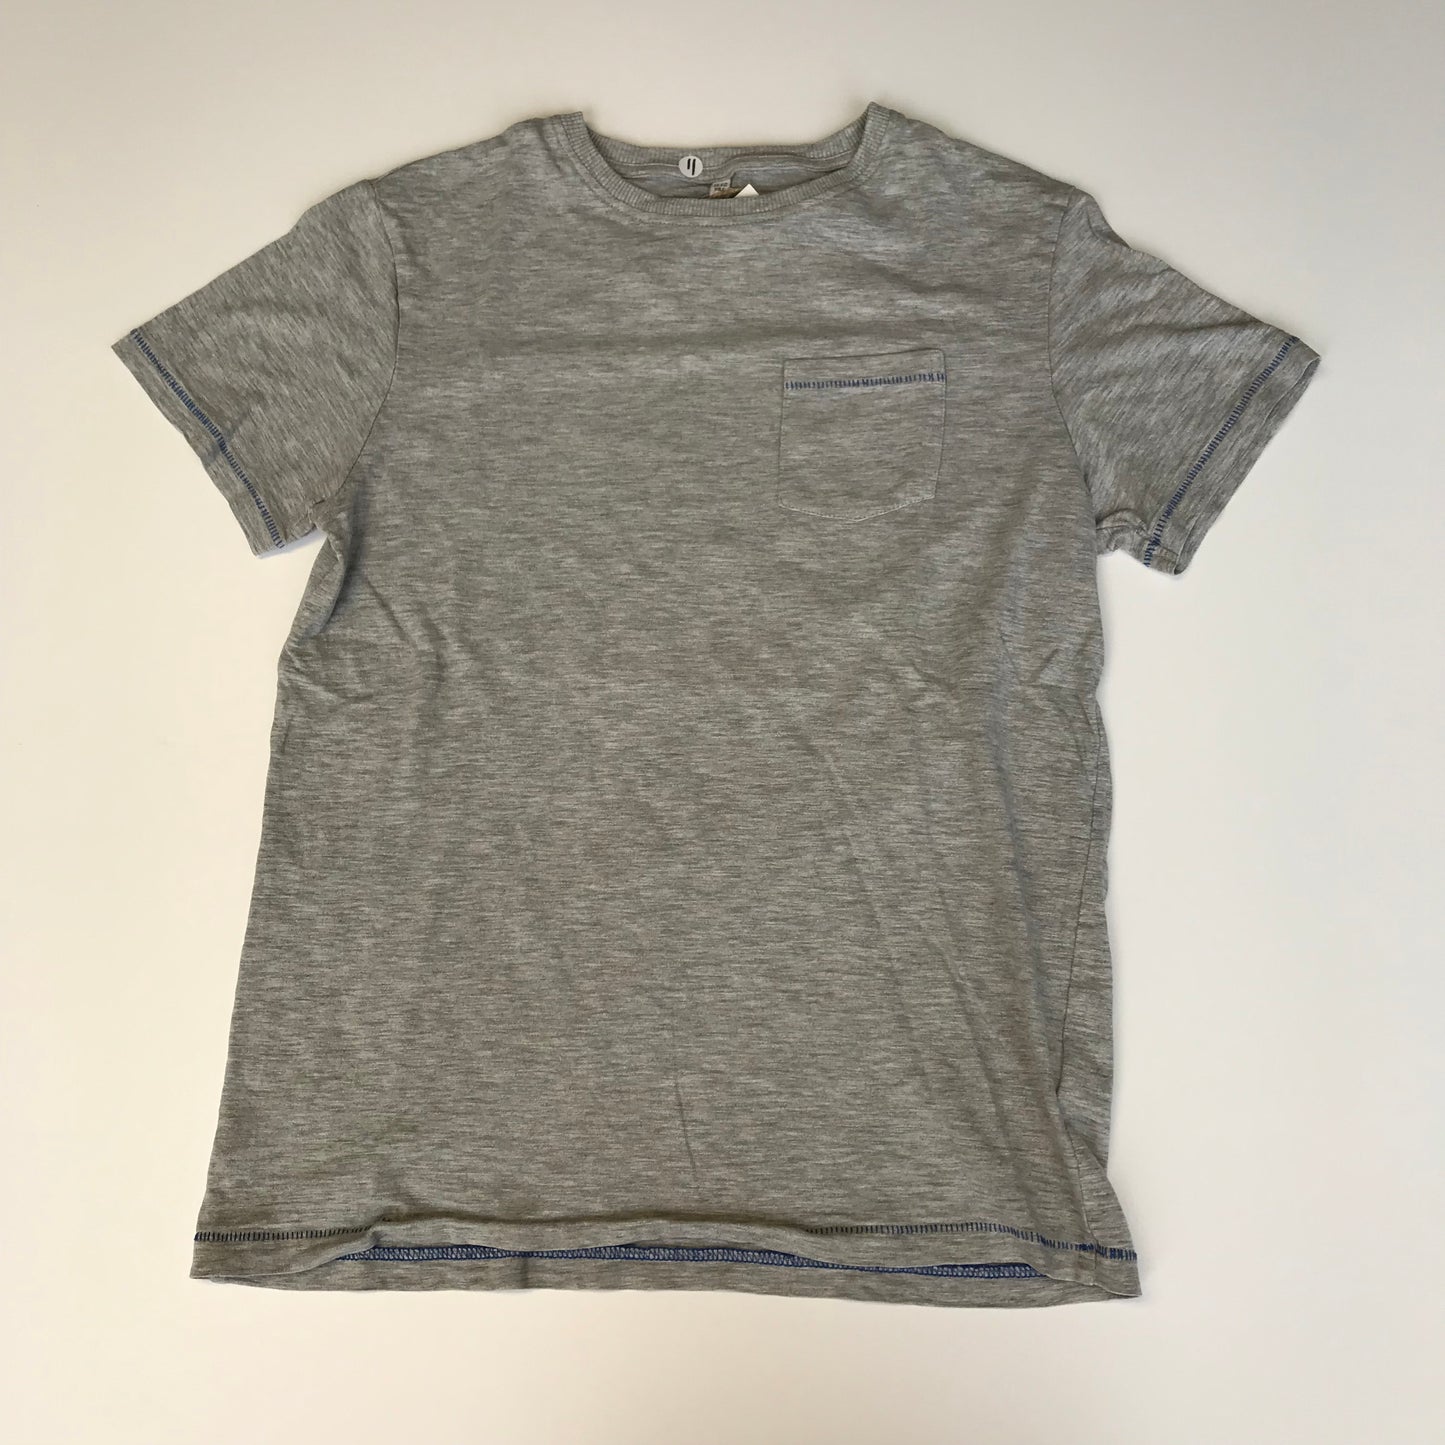 M&S Grey Simple Style T-Shirt Age 11